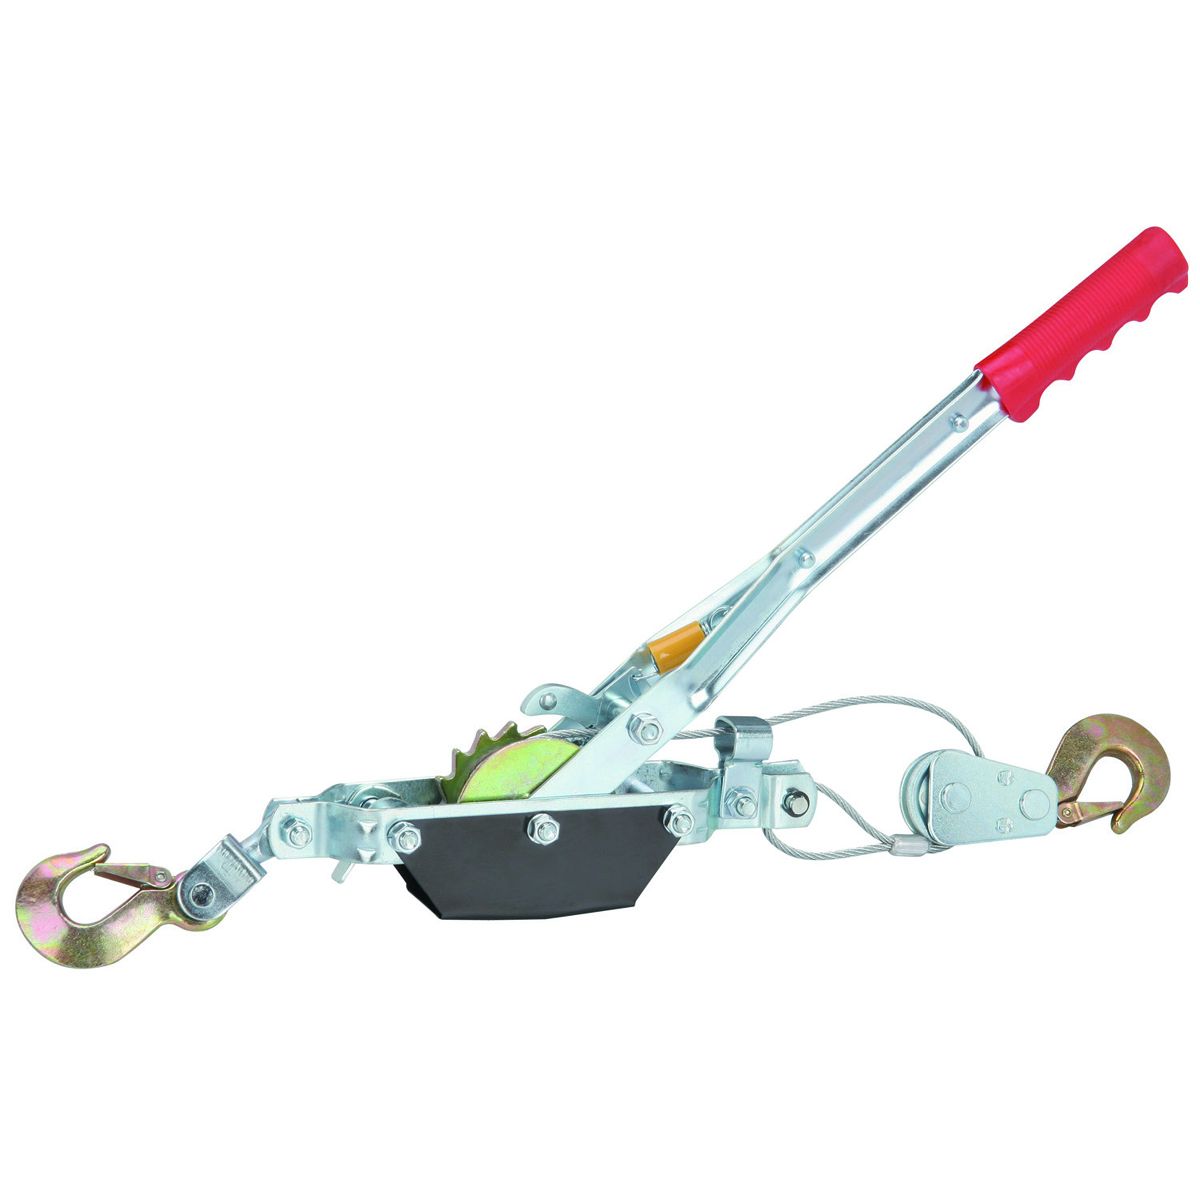 HAUL-MASTER 1200 Lb. Capacity Cable Puller